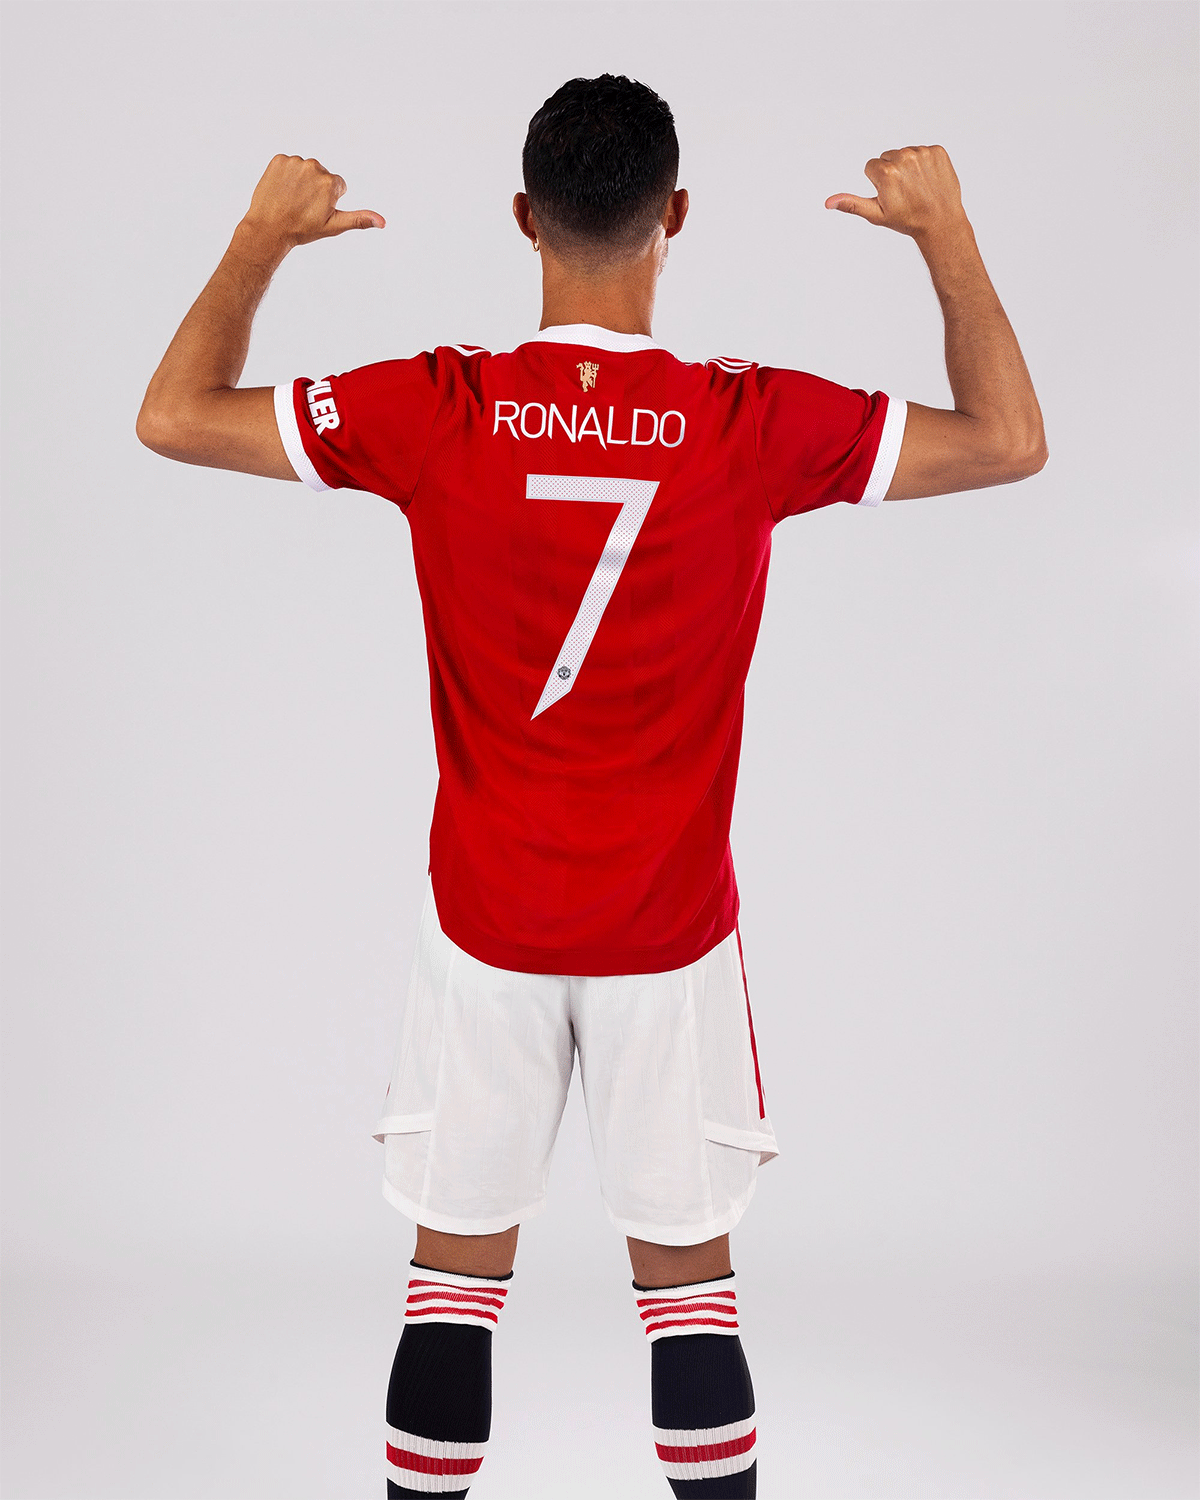 Cristiano Ronaldo donned the number seven shirt during his first stint at the club, following in the footsteps of great United players including George Best, Bryan Robson, Eric Cantona and David Beckham.